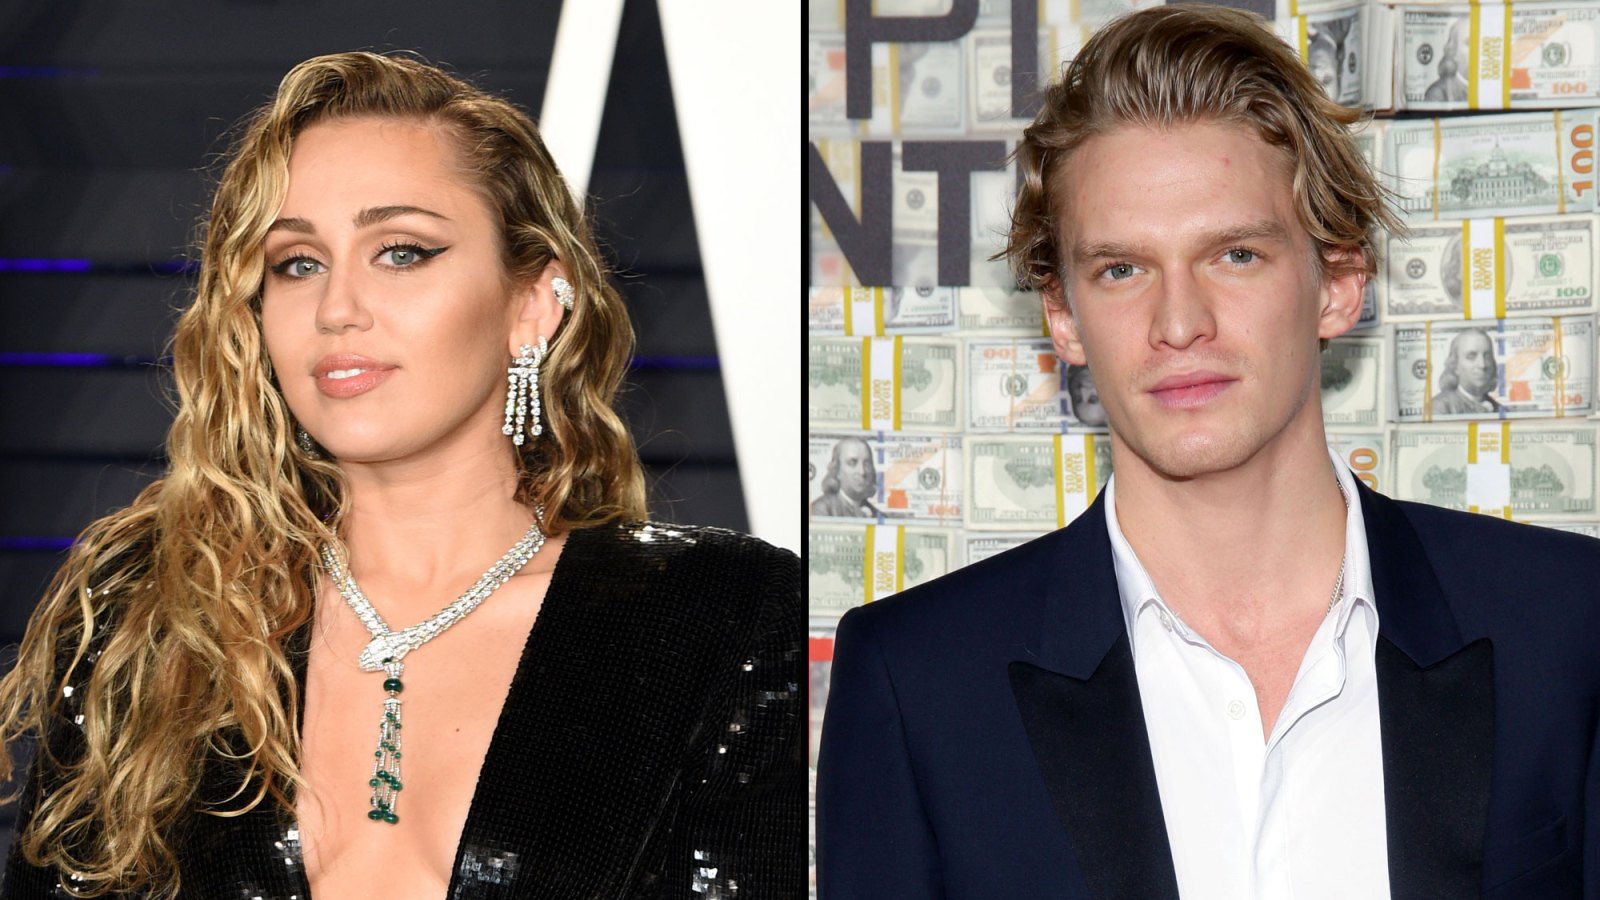 Miley Cyrus Says Cody Simpson Is Her 'Boo Thang' After Singer Revealed He's 'Not Single'